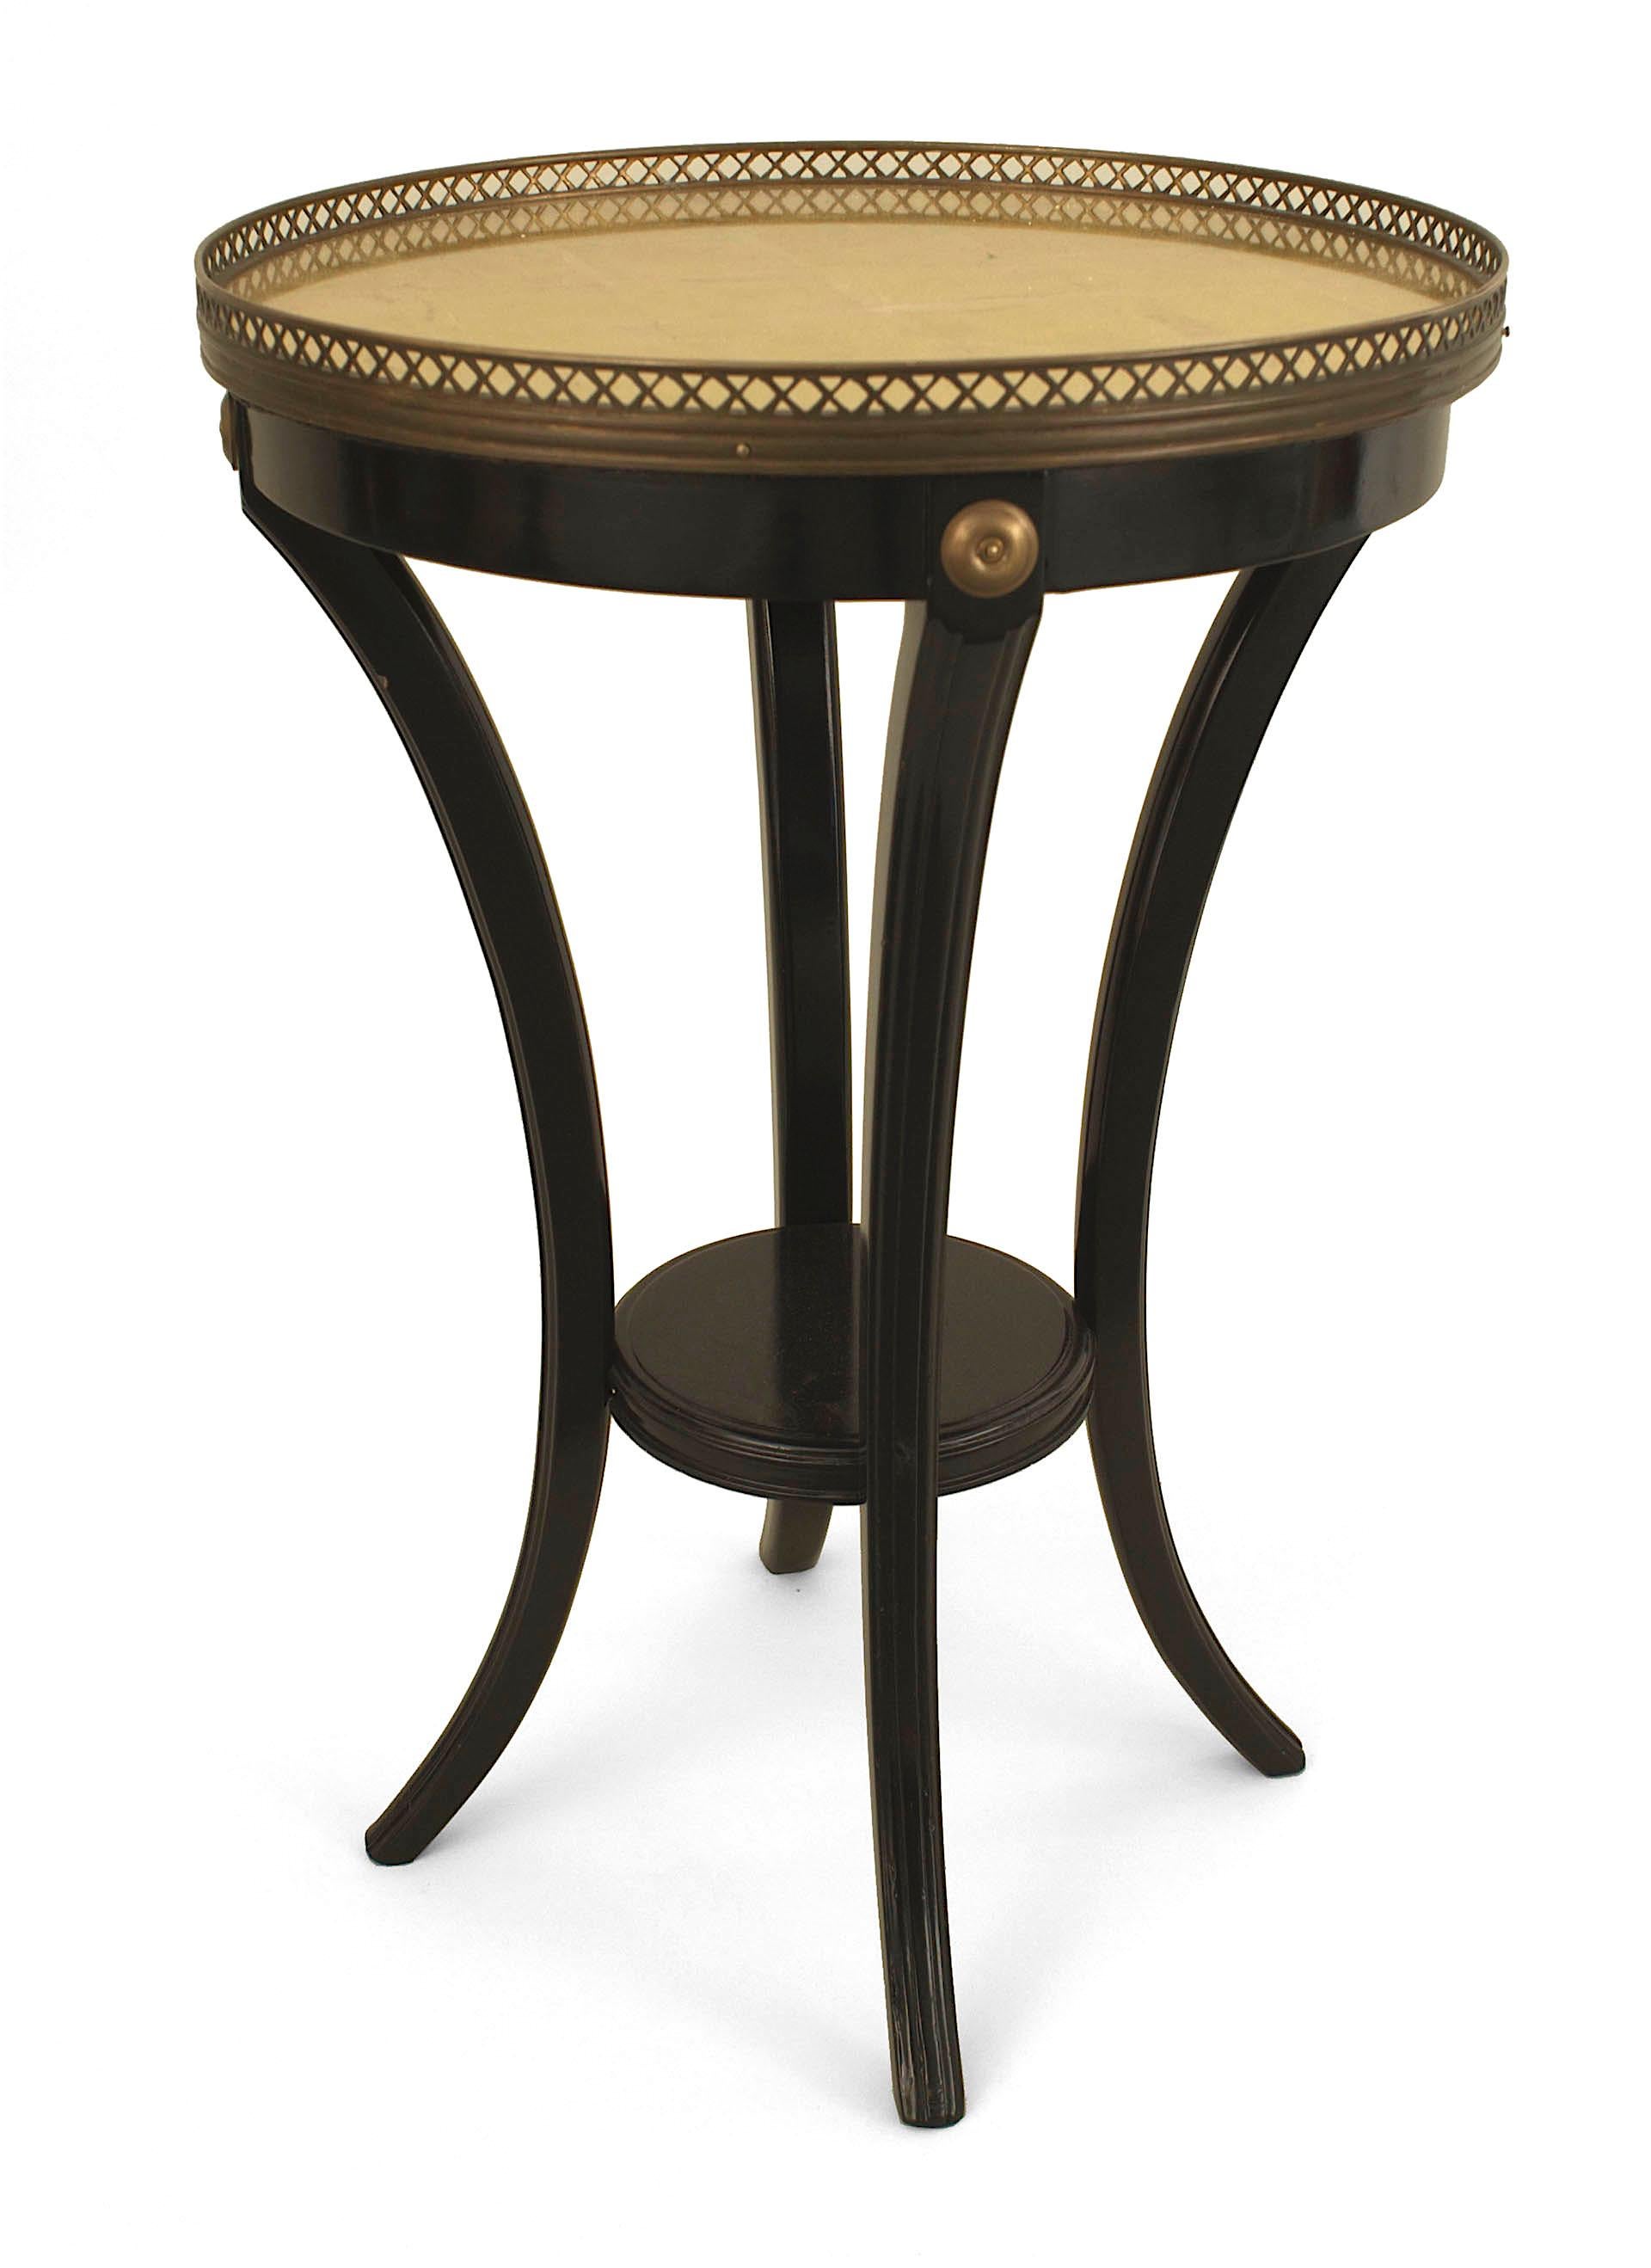 Pair of French Louis XVI-style (1940s) ebonized end tables with a round small shelf stretcher and a gilt glass round top having a filigree brass gallery. (stamped: JANSEN) (PRICED AS Pair)
